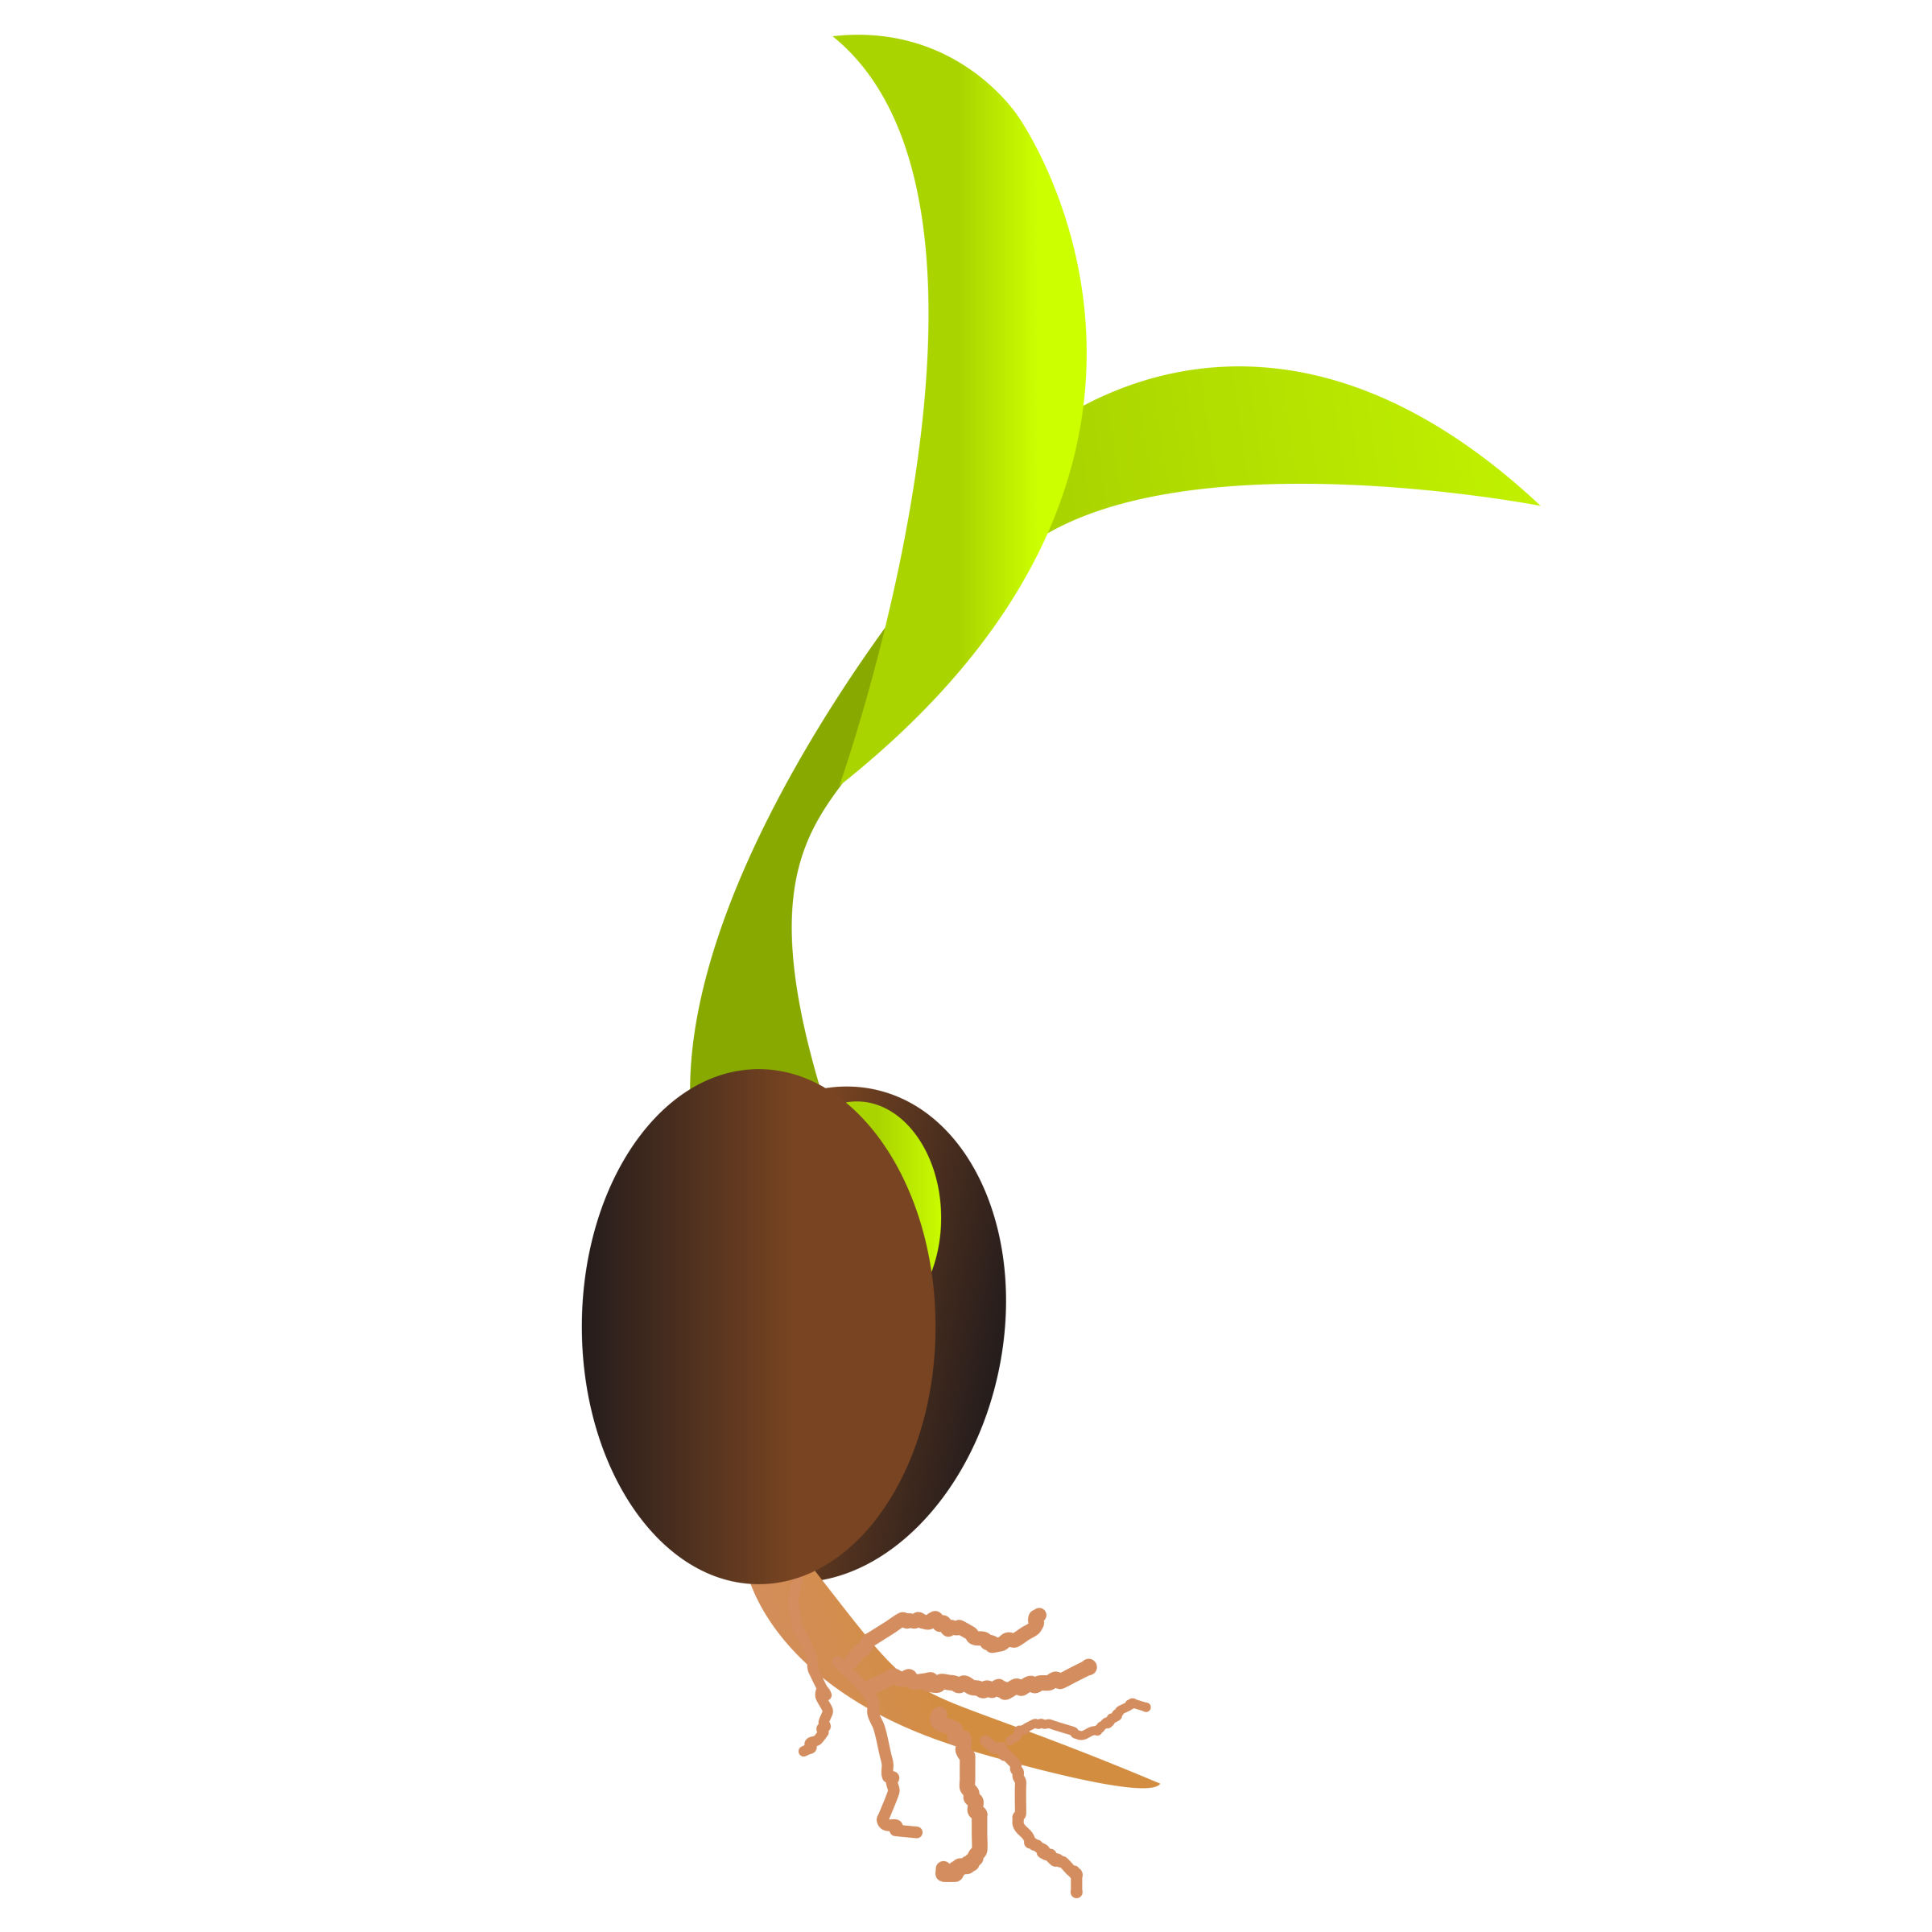 ThisIcons Png design of New Life- A germinating seed., PNG Of A Seed - Free PNG